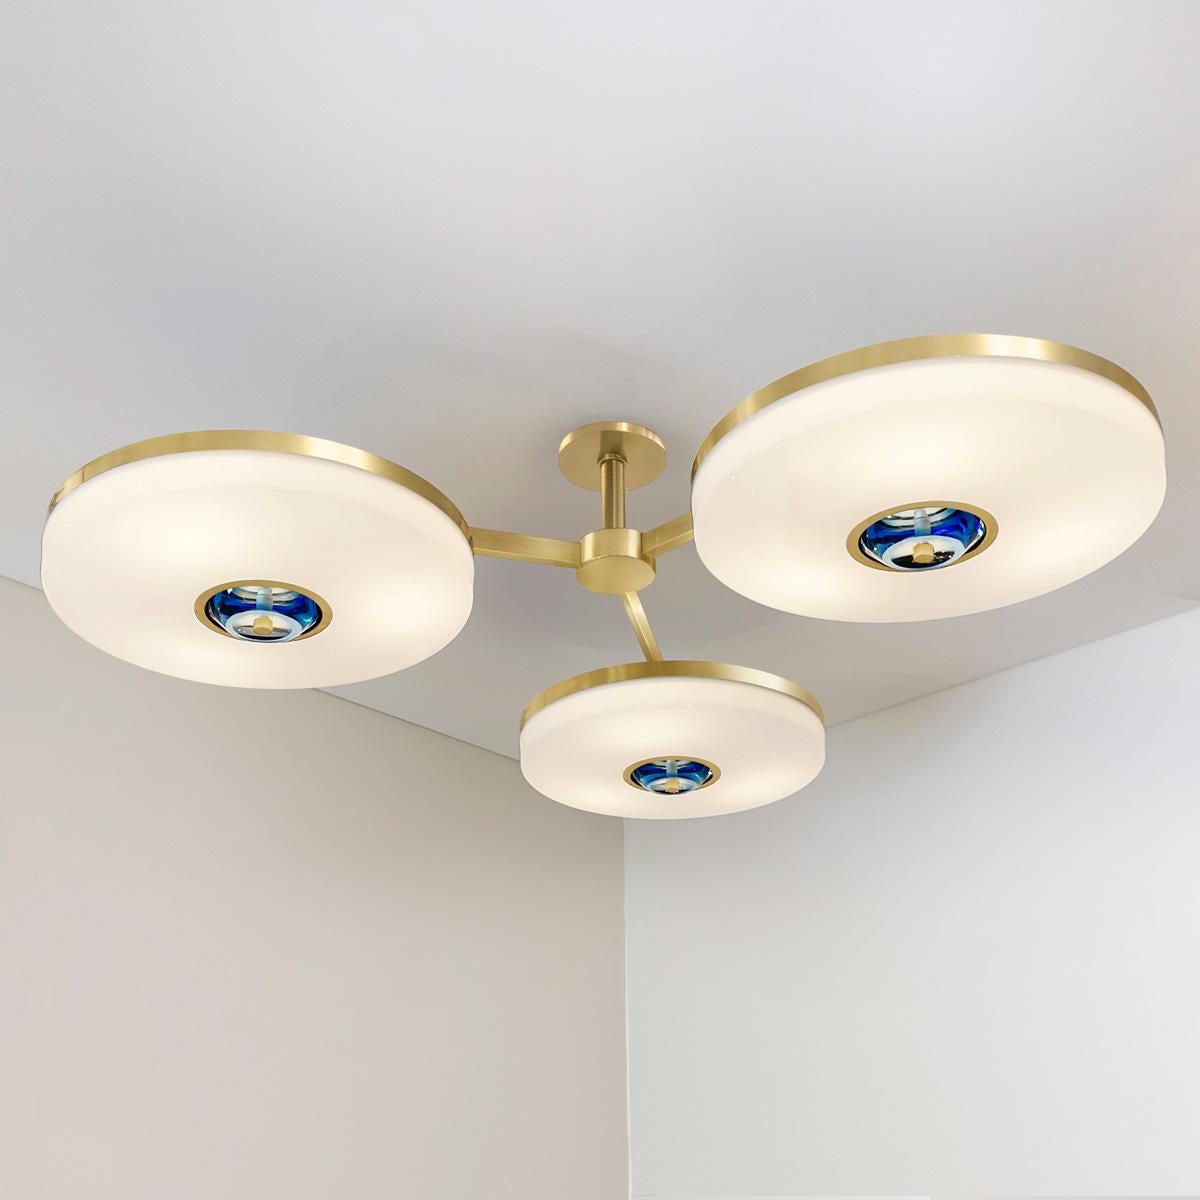 Iris N. 3 Ceiling Light by Gaspare Asaro-Bronze Finish In New Condition For Sale In New York, NY